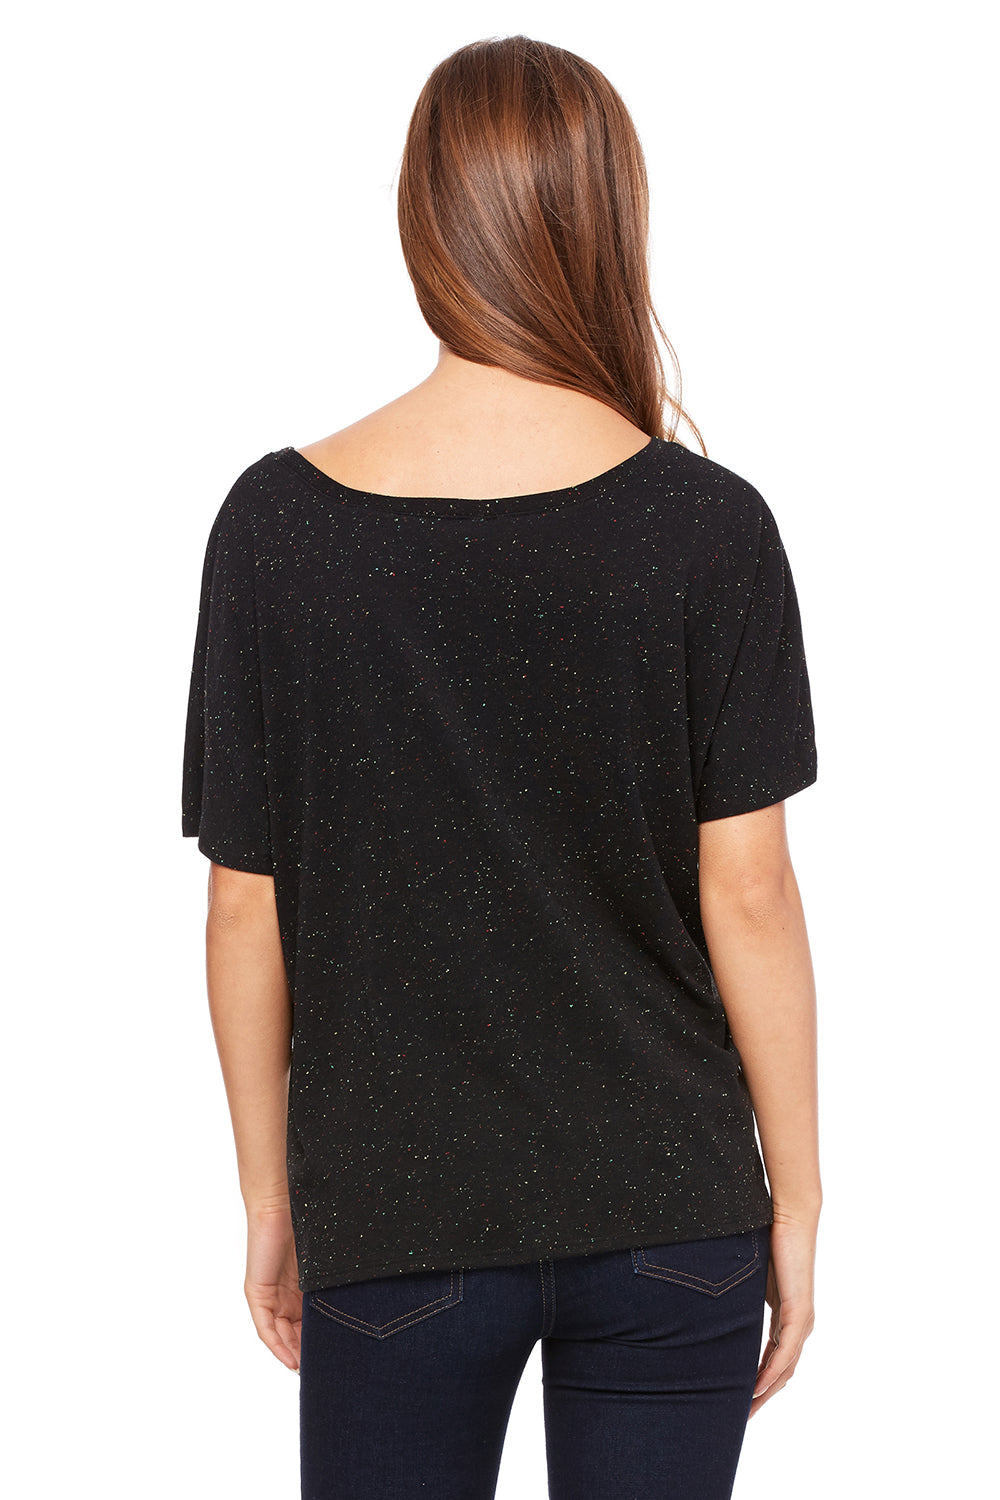 Bella + Canvas BC8816/8816 Womens Slouchy Short Sleeve Wide Neck T-Shirt Black Speckled Model Back